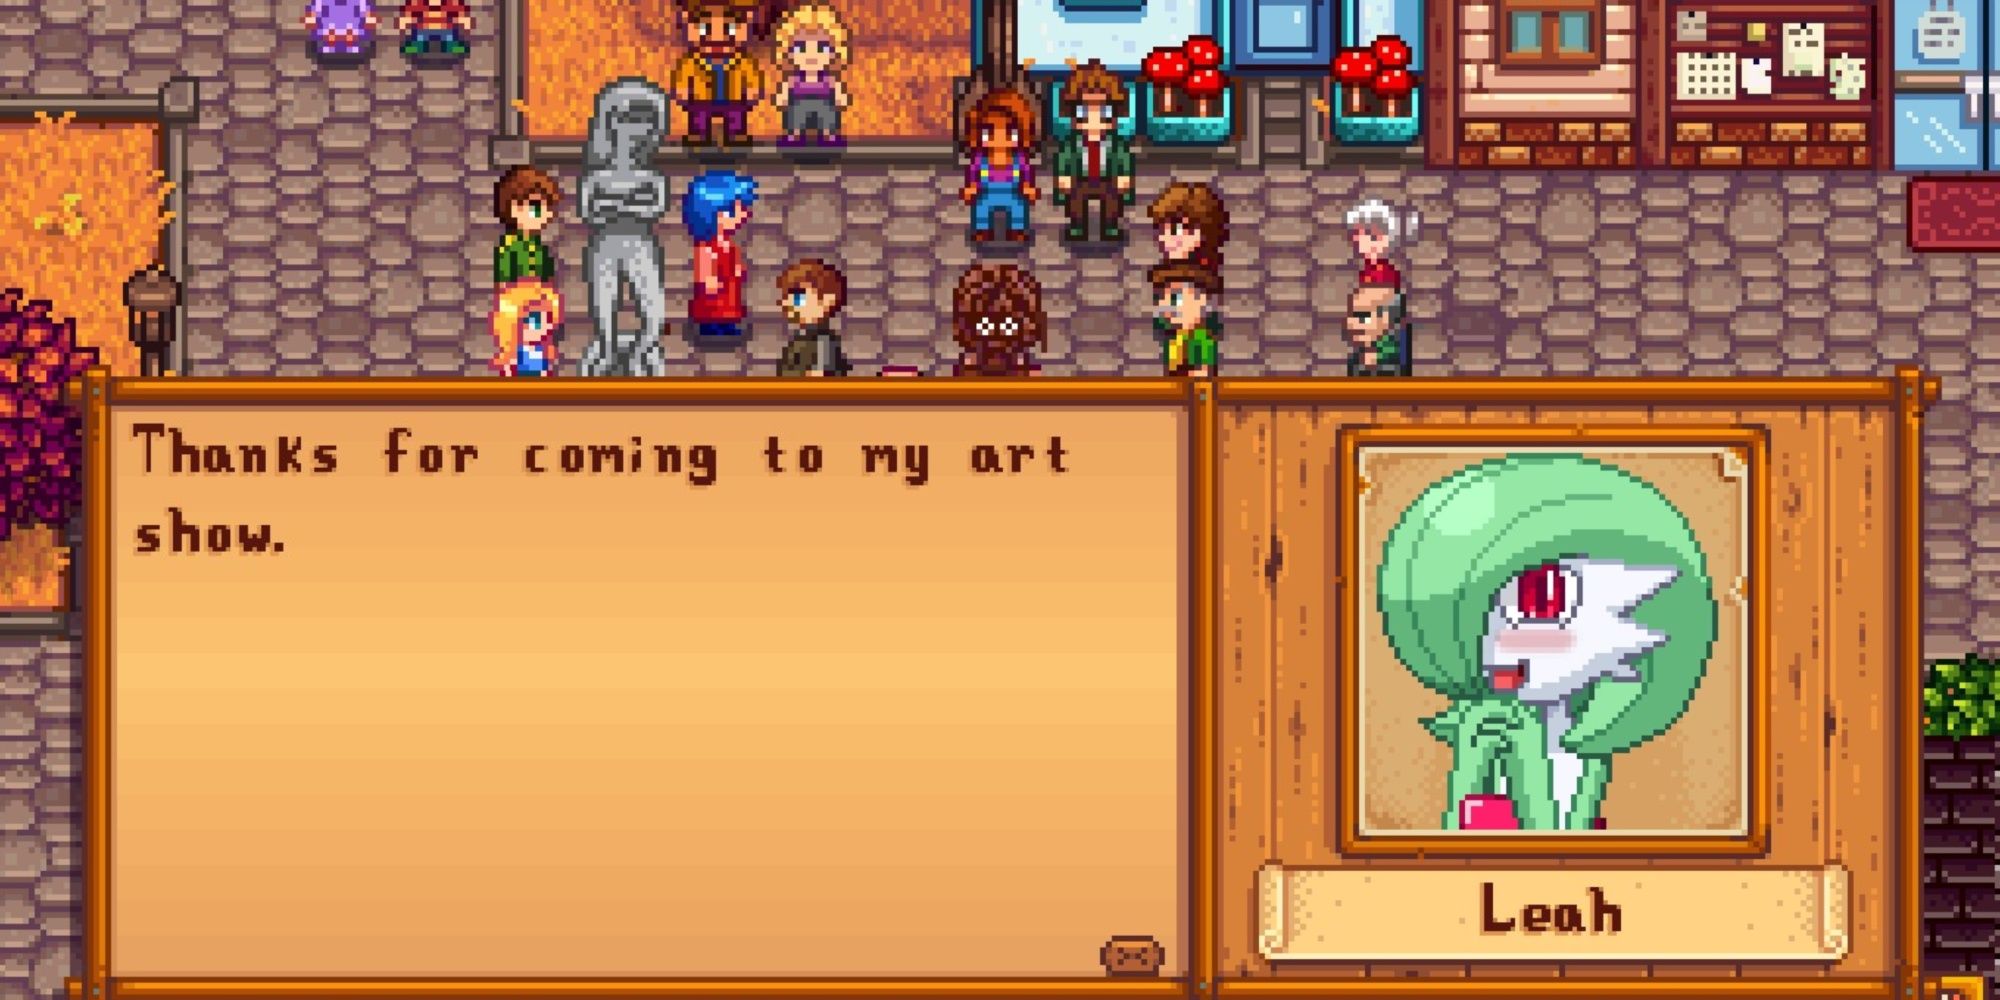 Stardew Valley, Leah as Gardevoir hosting her art show and welcoming everyone during her eight-heart event scene